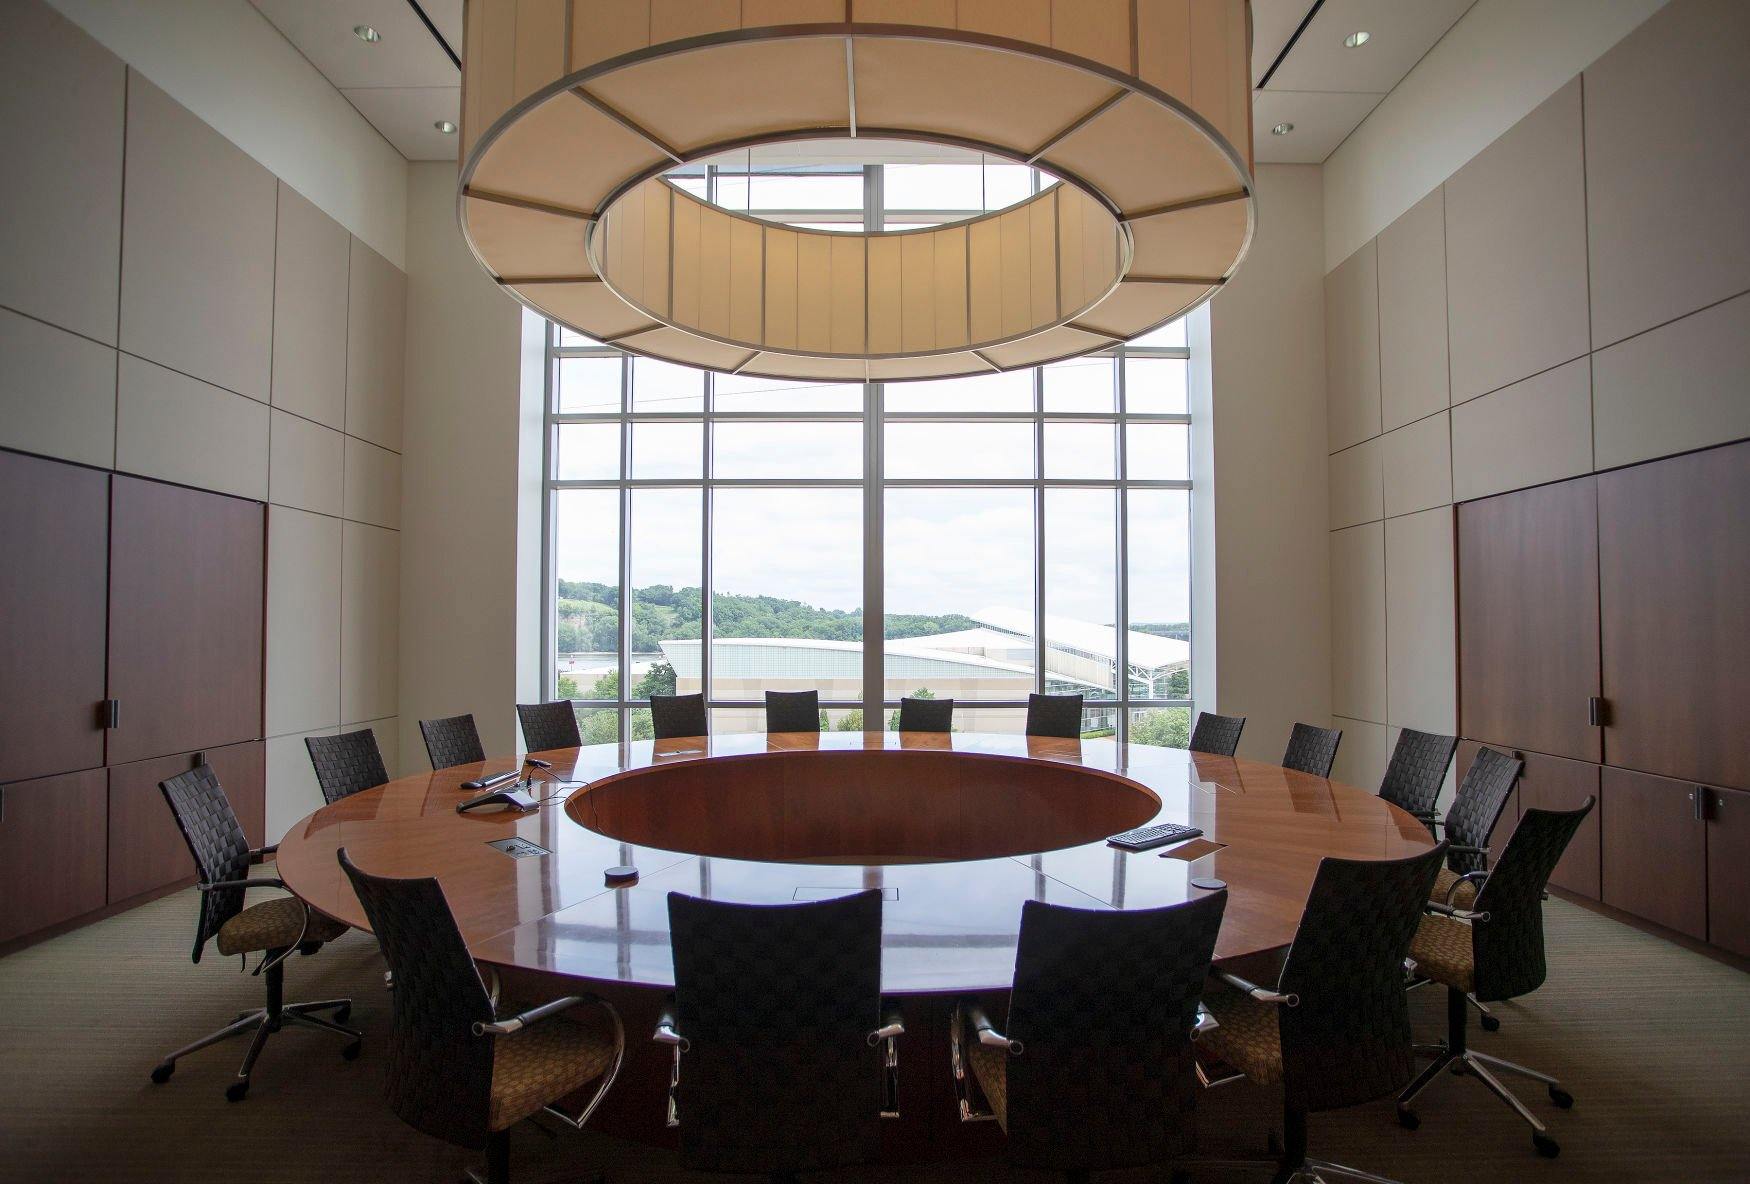 A conference room at Conlon Construction’s new corporate offices in Dubuque.    PHOTO CREDIT: Stephen Gassman